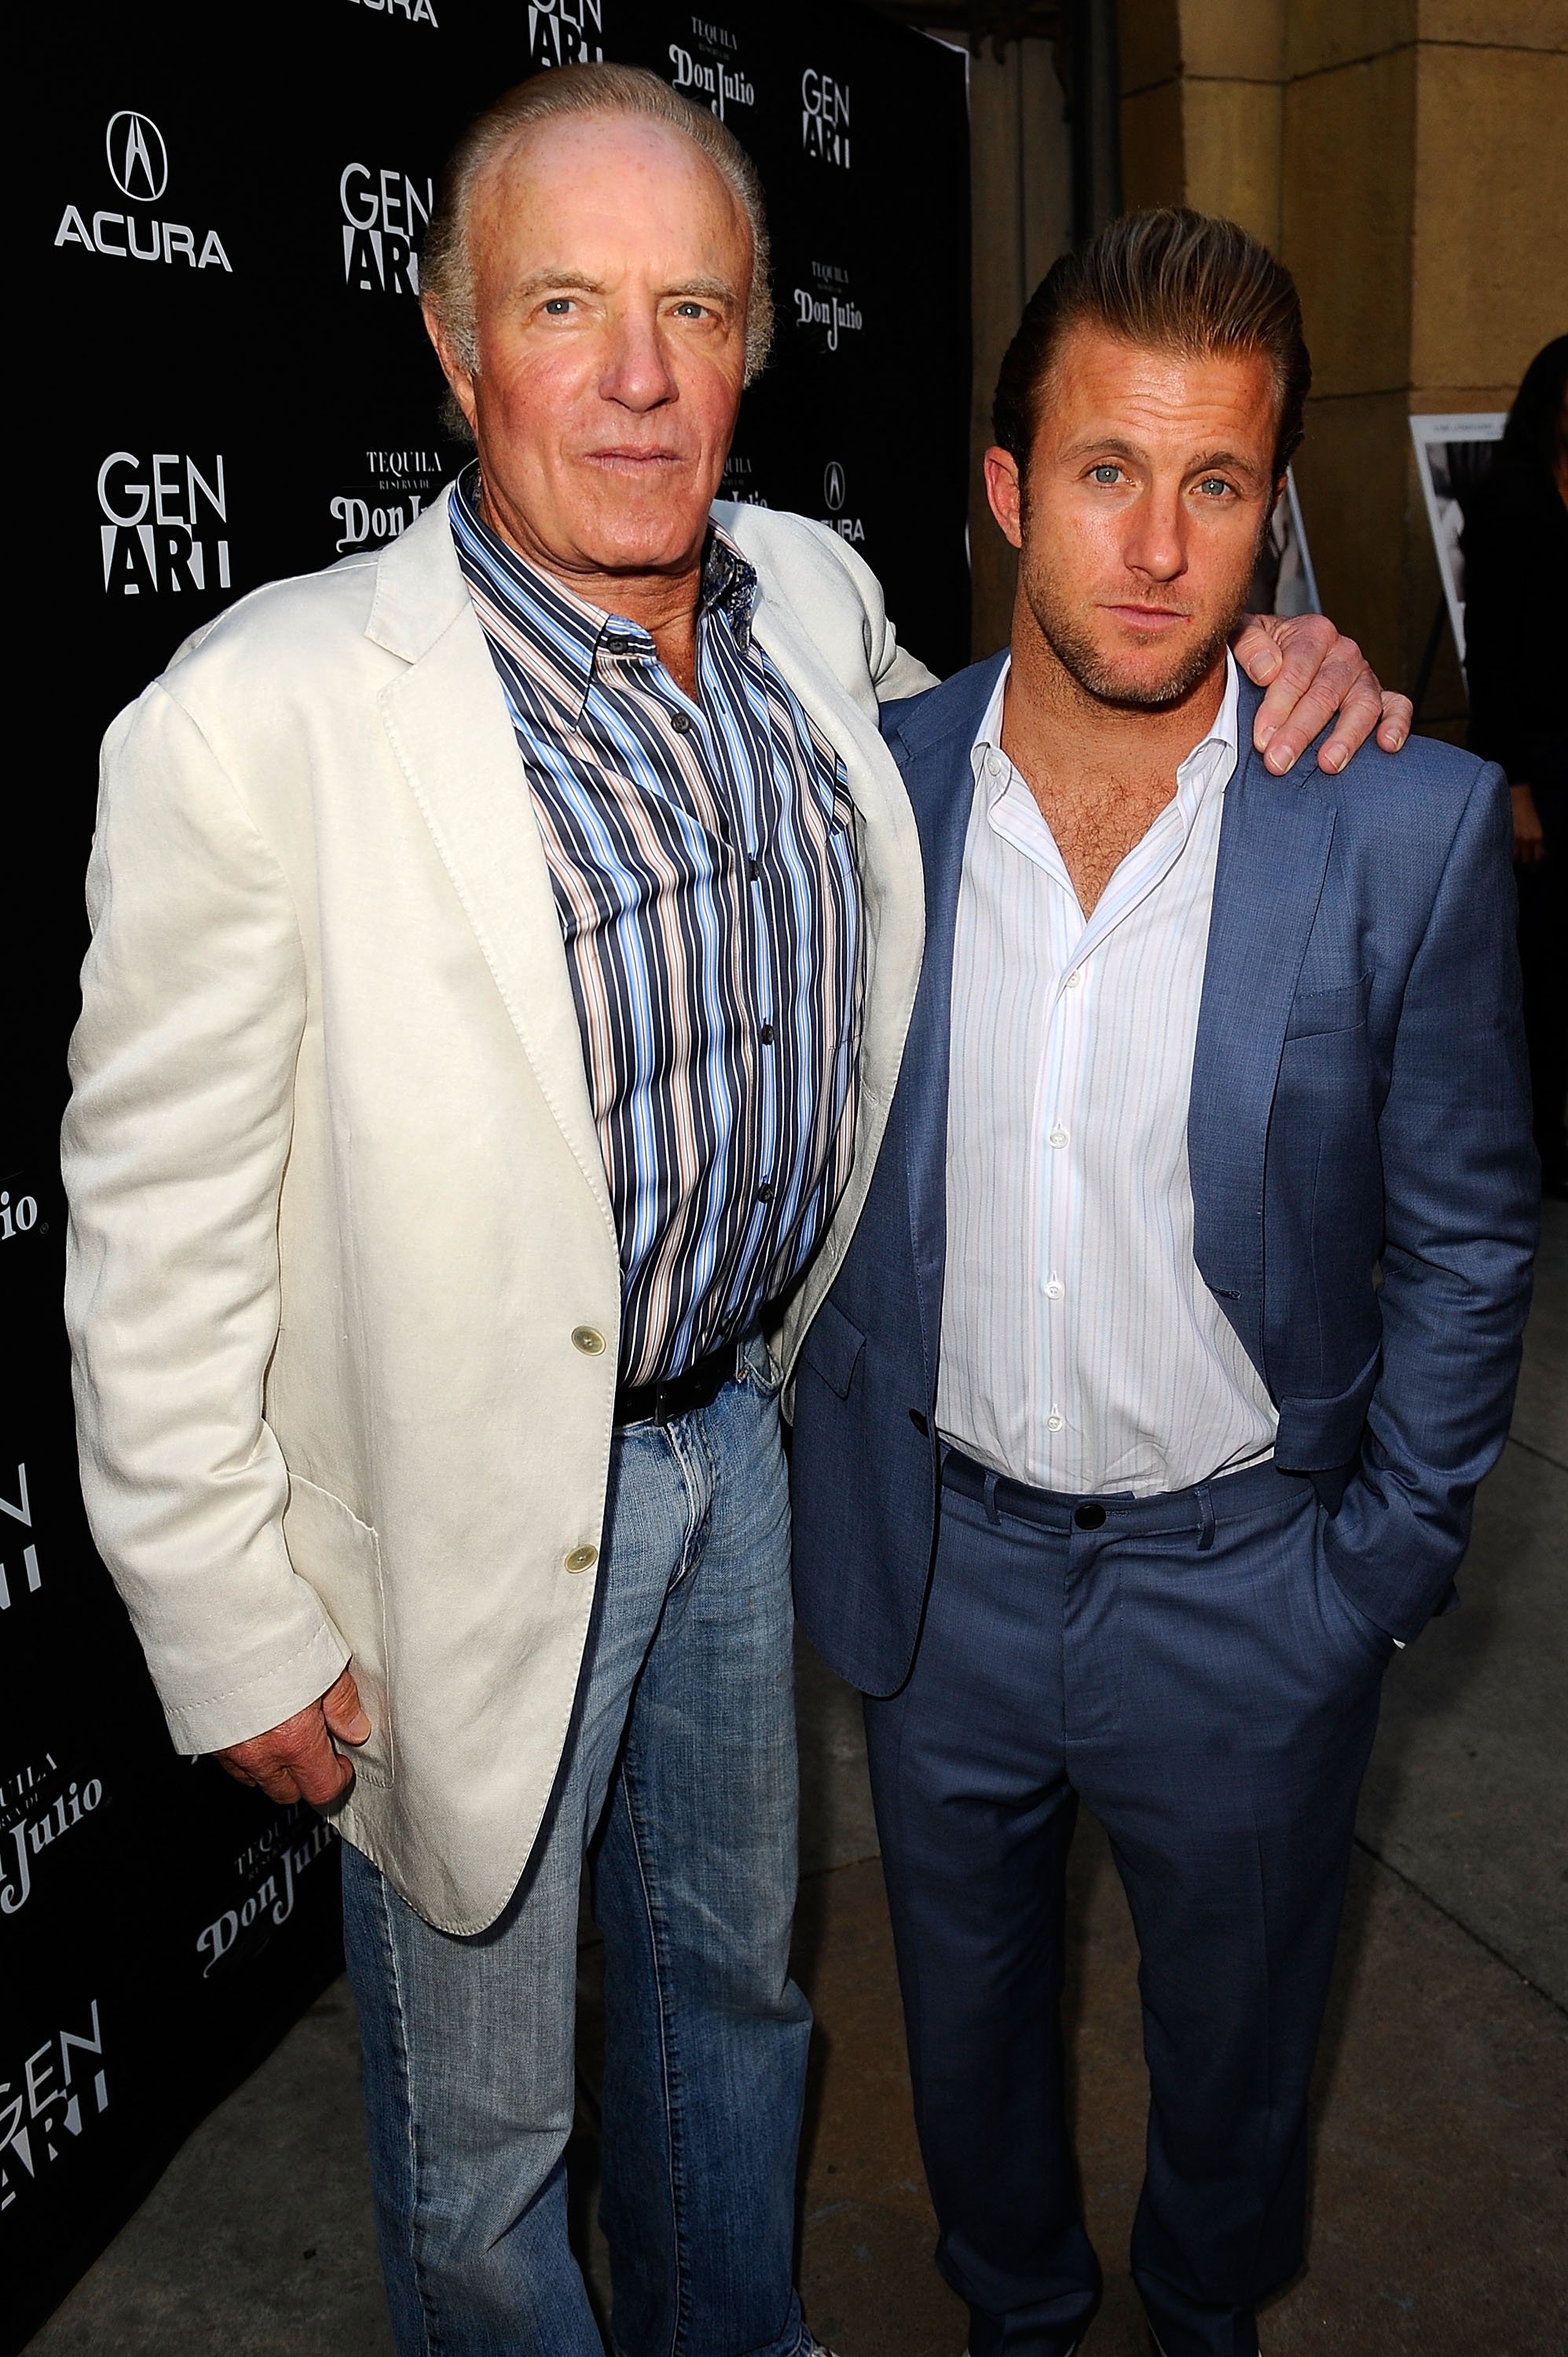  Actors James Caan and Scott Caan arrive at the Los Angeles premiere of IFC Films' "Mercy" at the Egyptian Theatre on May 3, 2010 in Hollywood, California. | Source: Getty Images 